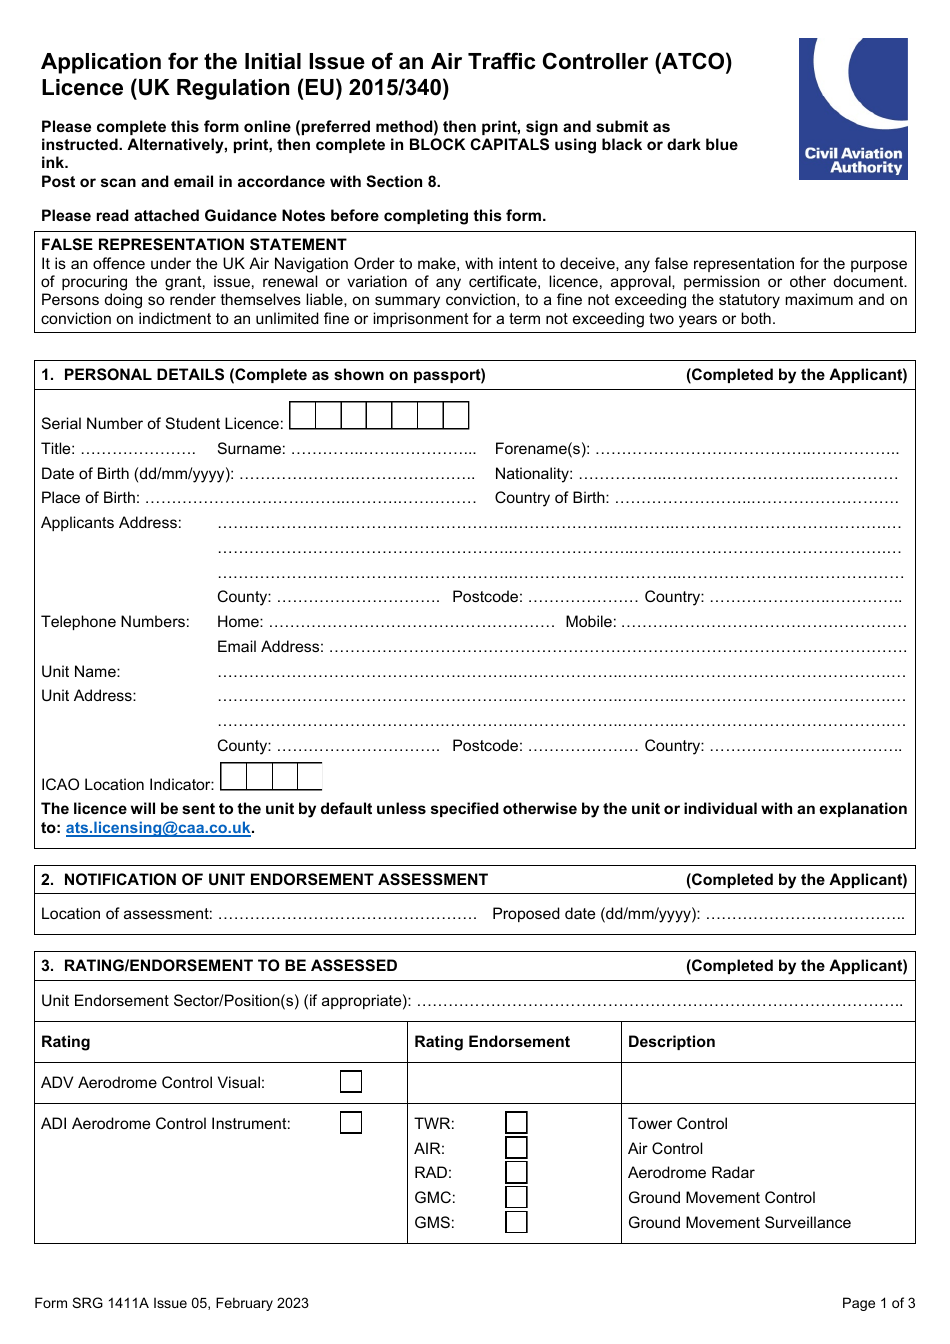 Form SRG1411A Application for the Initial Issue of an Air Traffic Controller (Atco) Licence (UK Regulation (Eu) 2015 / 340) - United Kingdom, Page 1